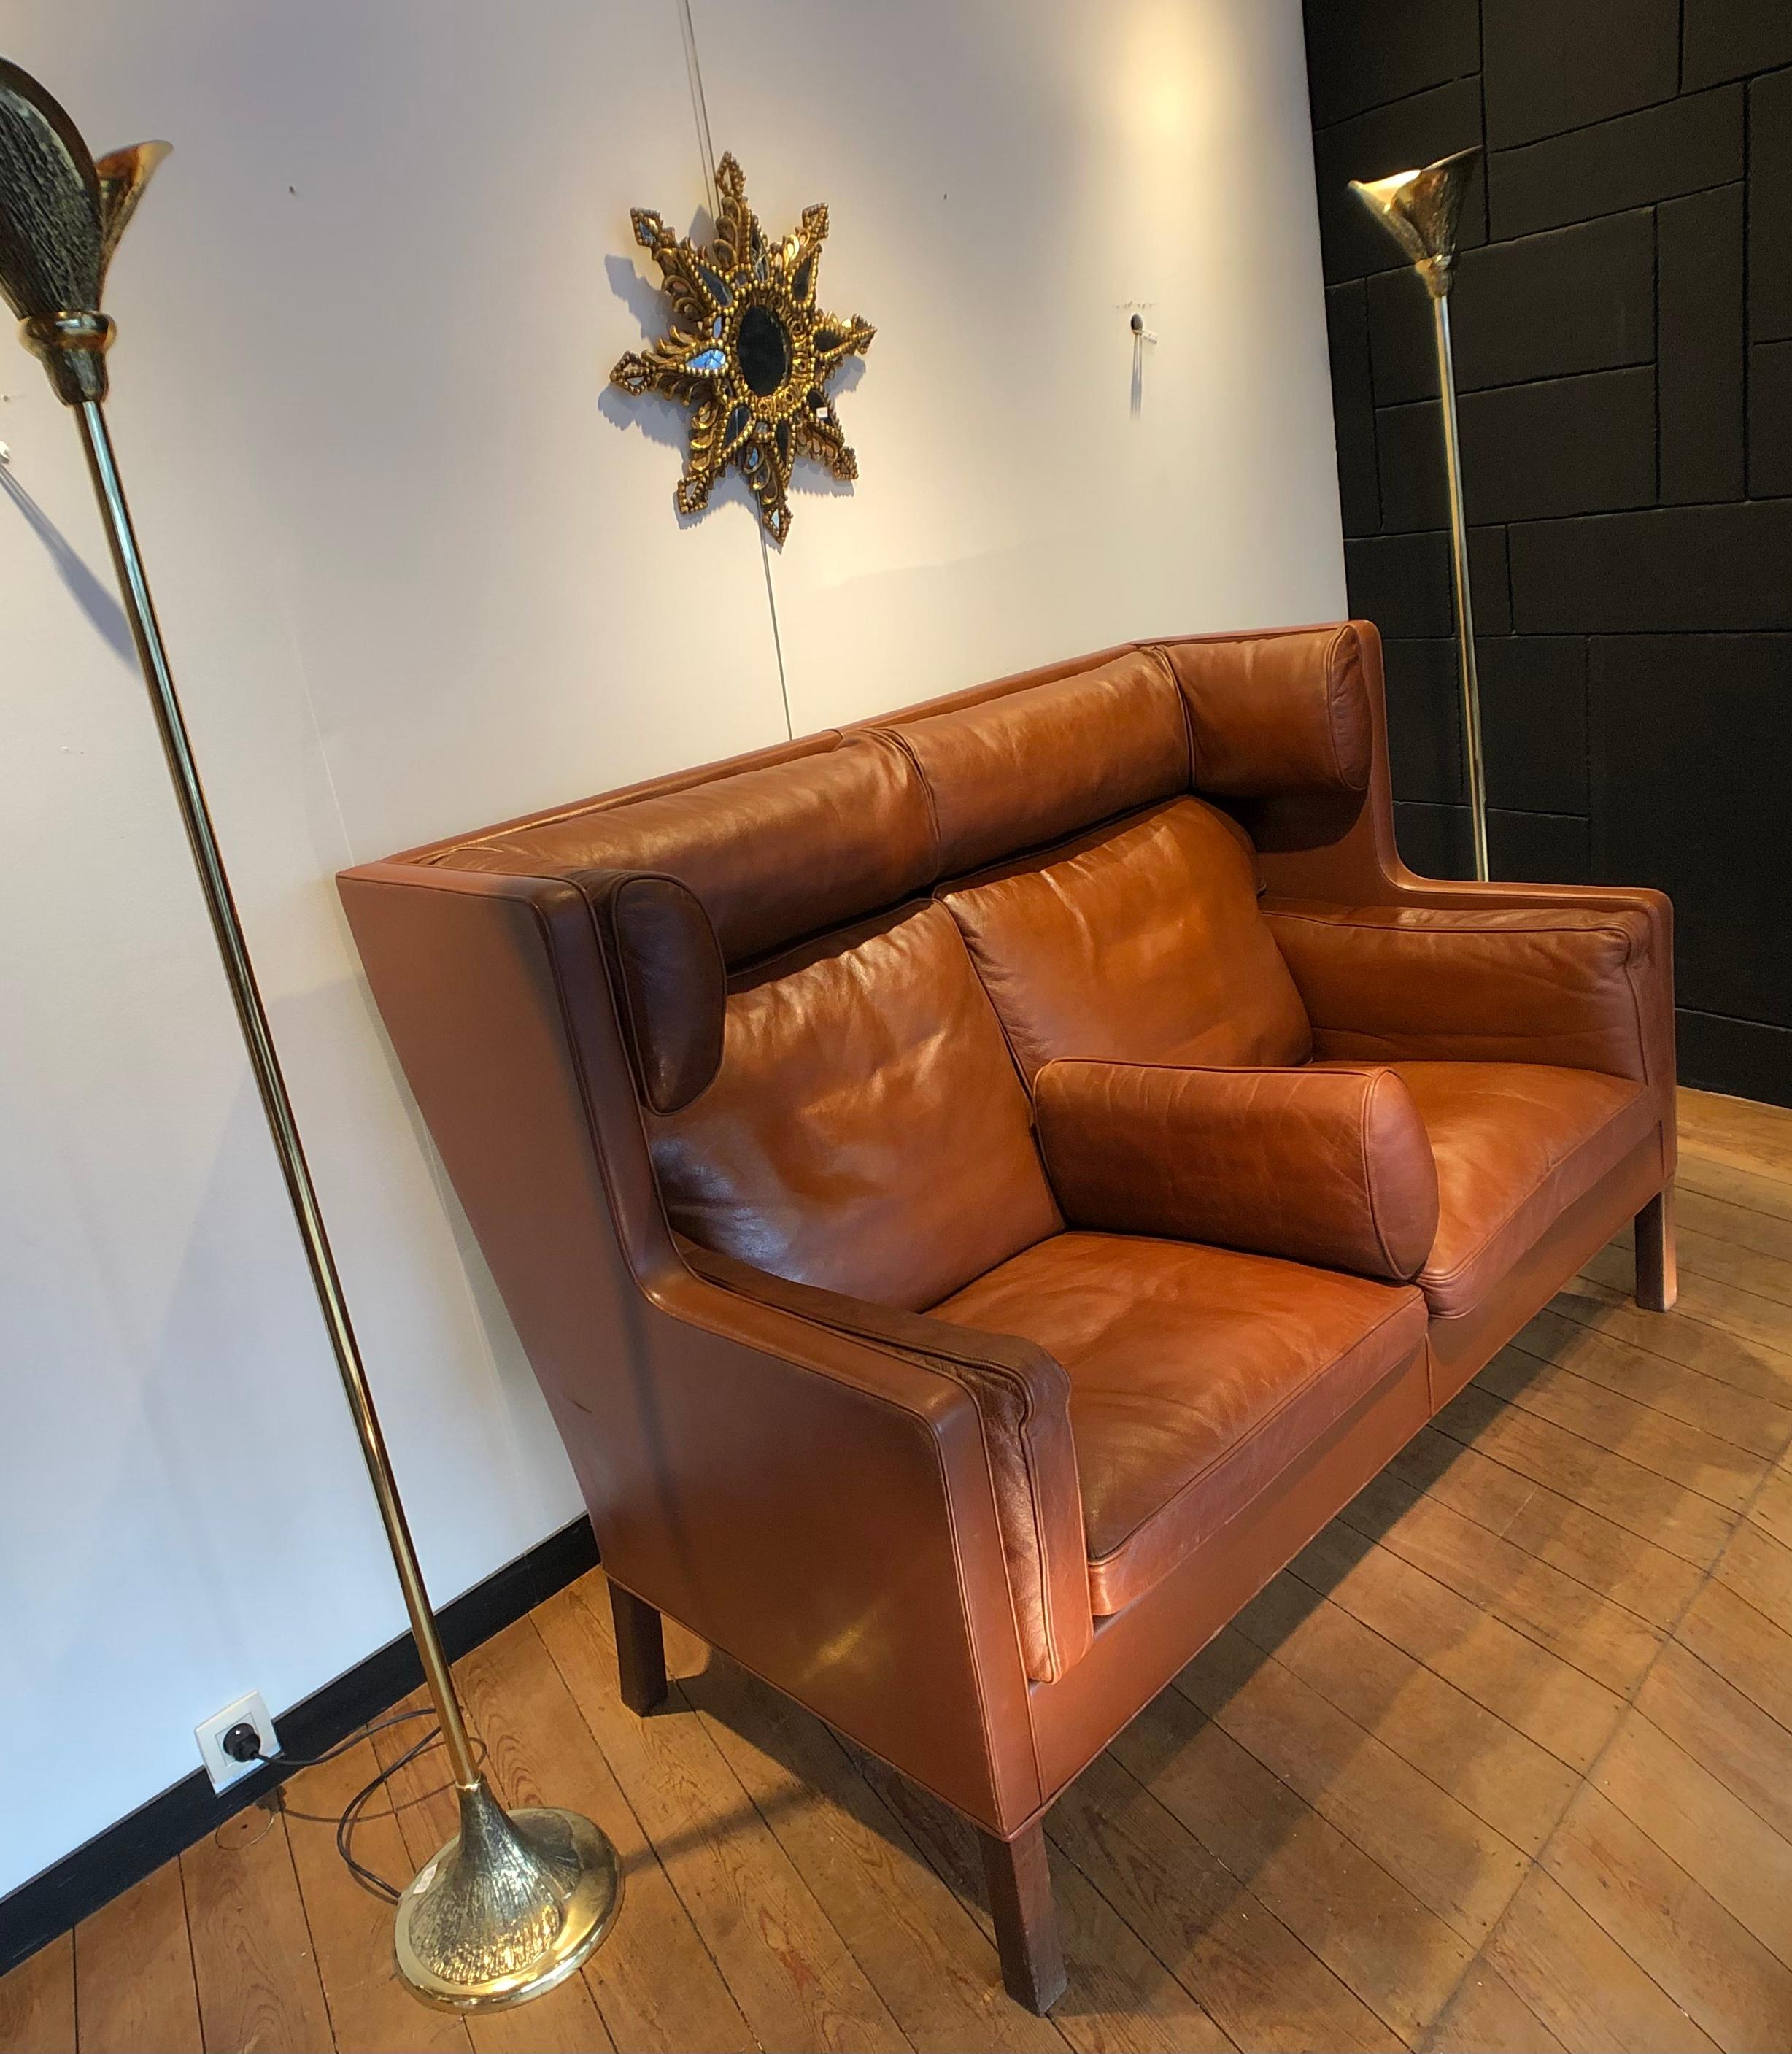 Two seats coupé sofa by Børge Mogensen for fredericia stolen møbelfabrik in cognac leather and mahogany foots.
This is an old model with a nice patina on leather and in relatively good condition (one scratche on the right side of the sofa )
Very